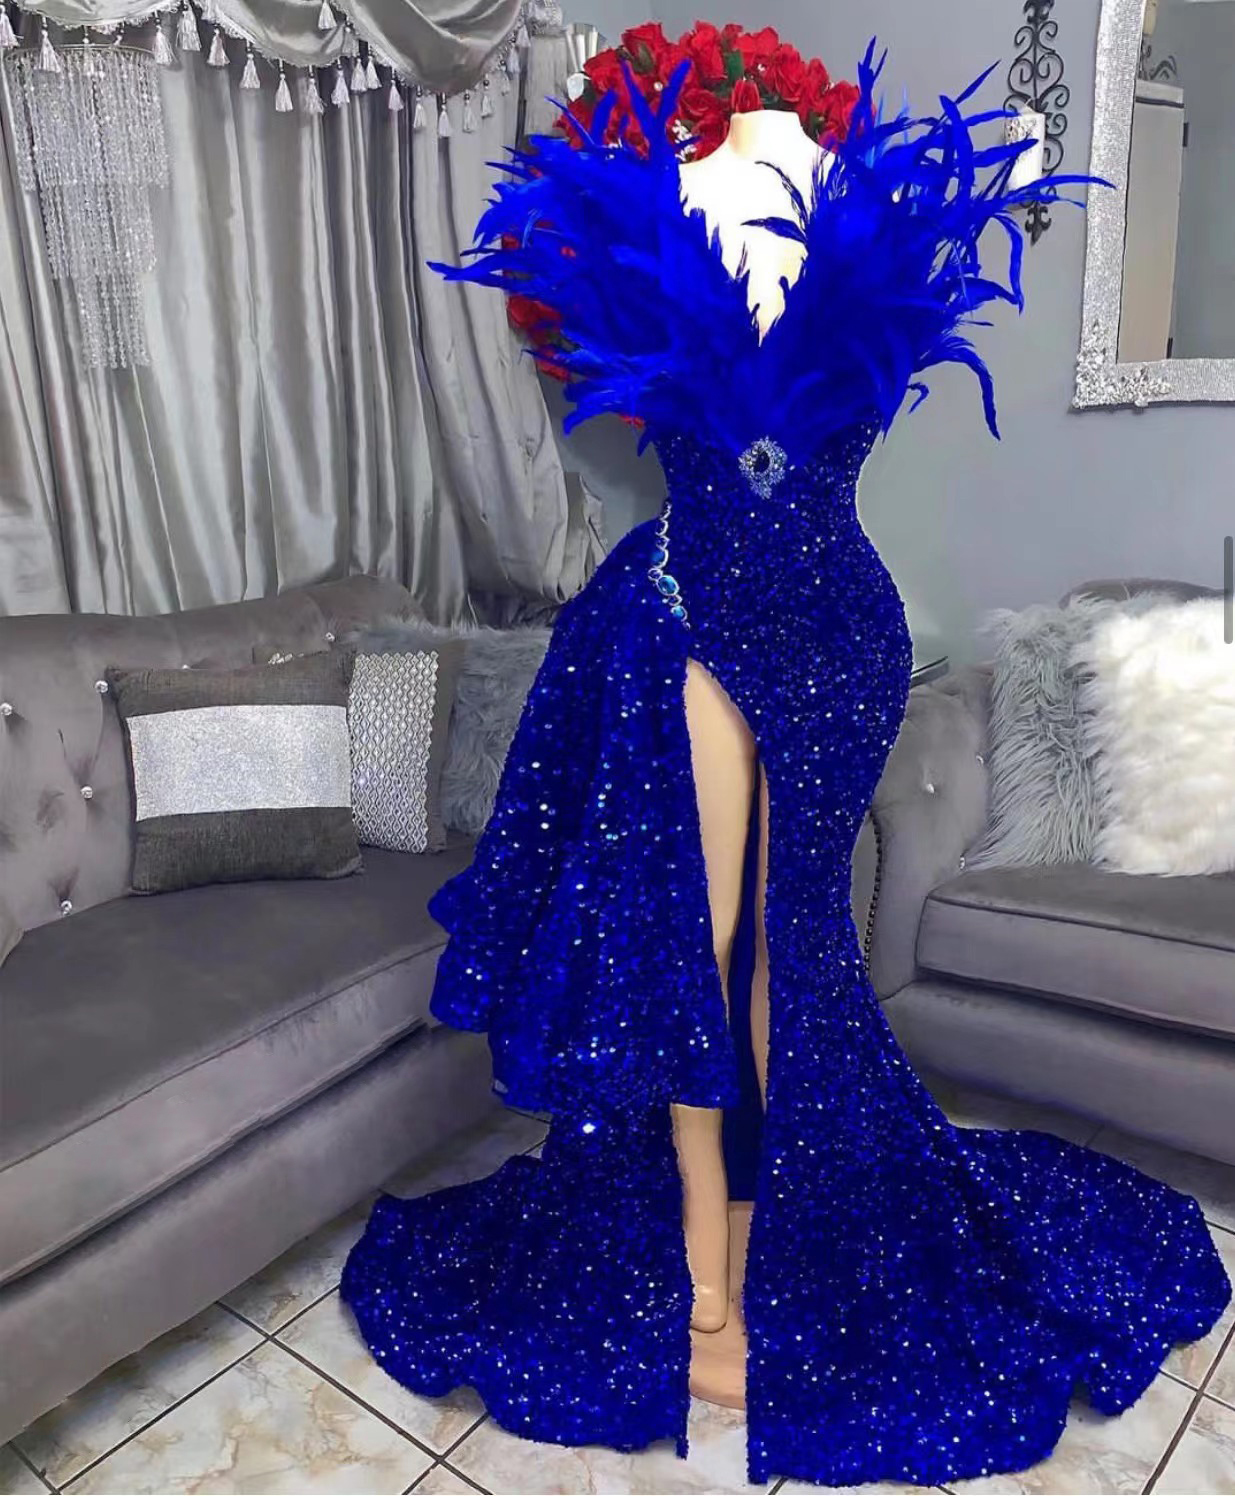 Feather Luxury Prom Dresses For Women, V Neck Sparkly Sequined Royal Blue Mermaid Prom Gown, With Side Slit Sexy Party Dresses Evening Wear,